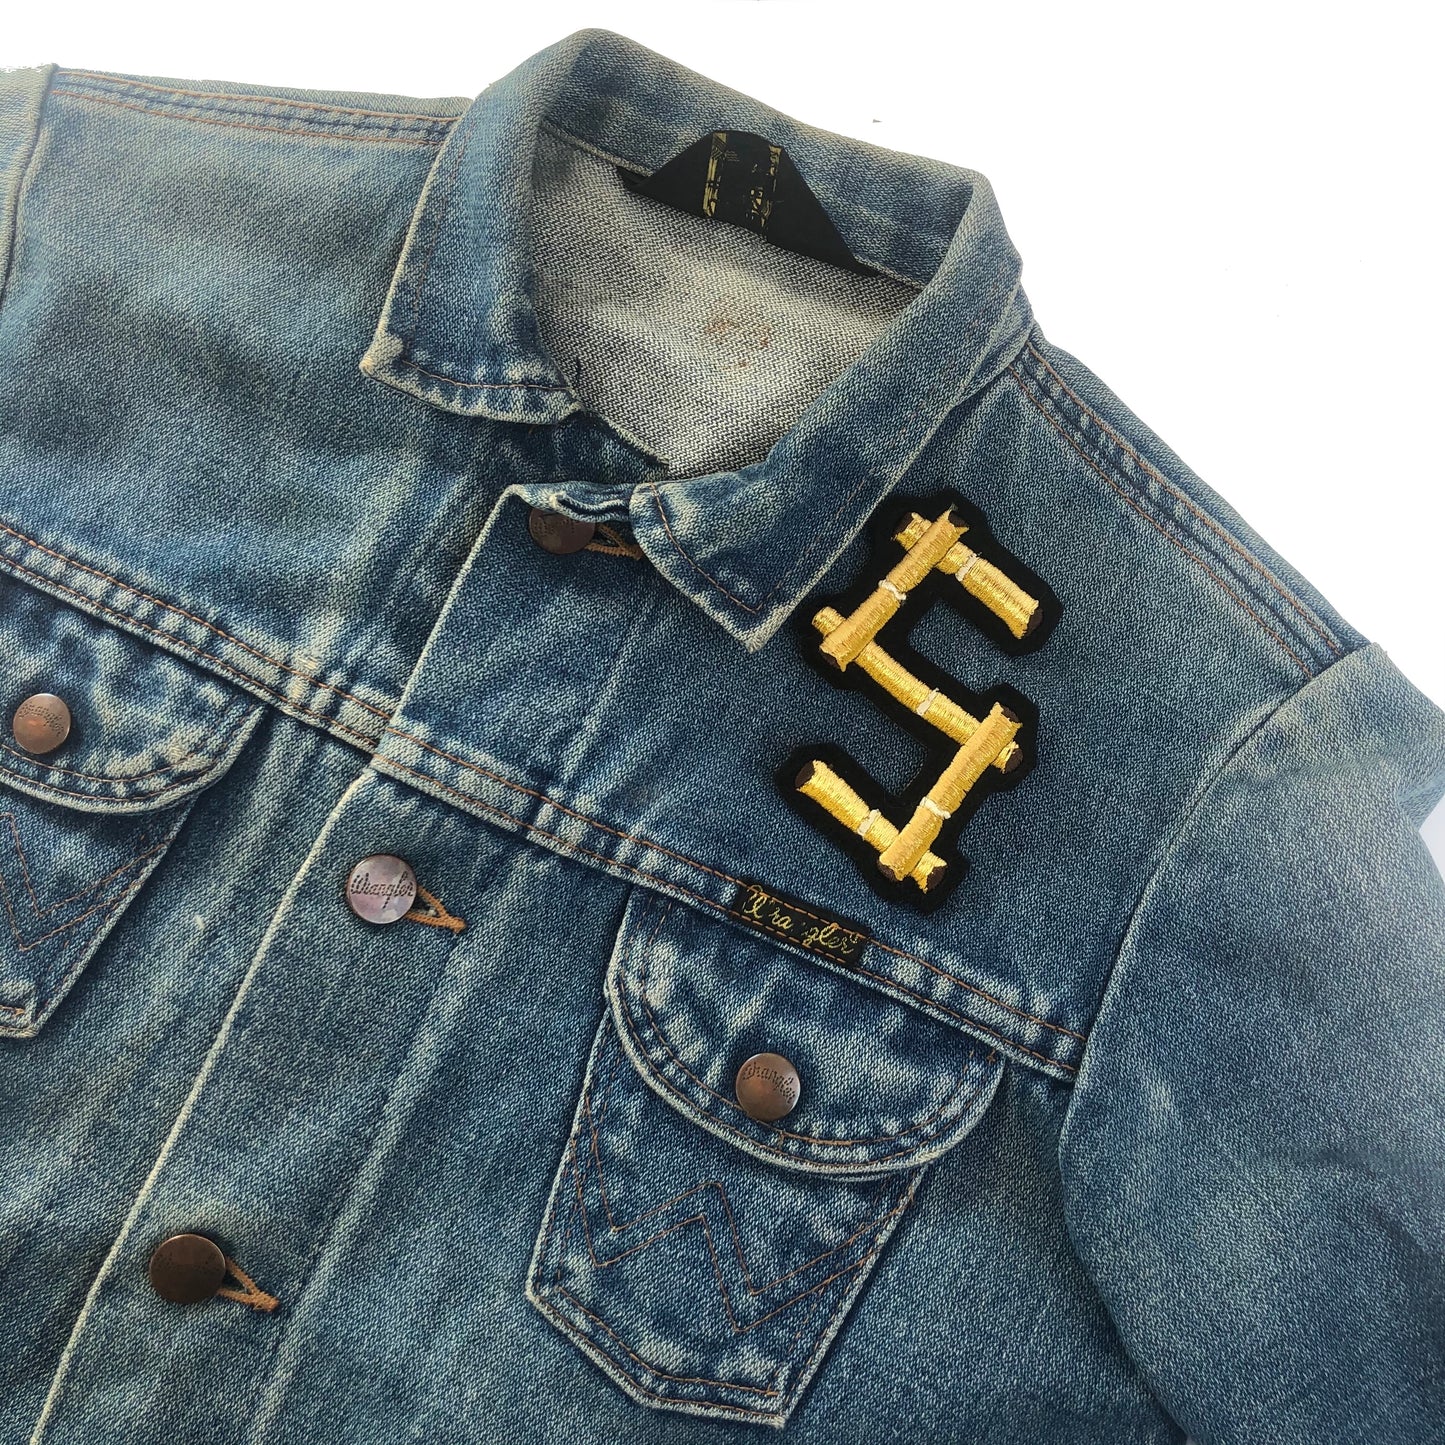 Bamboo embroidered letter S on the front shoulder of a blue denim jacket